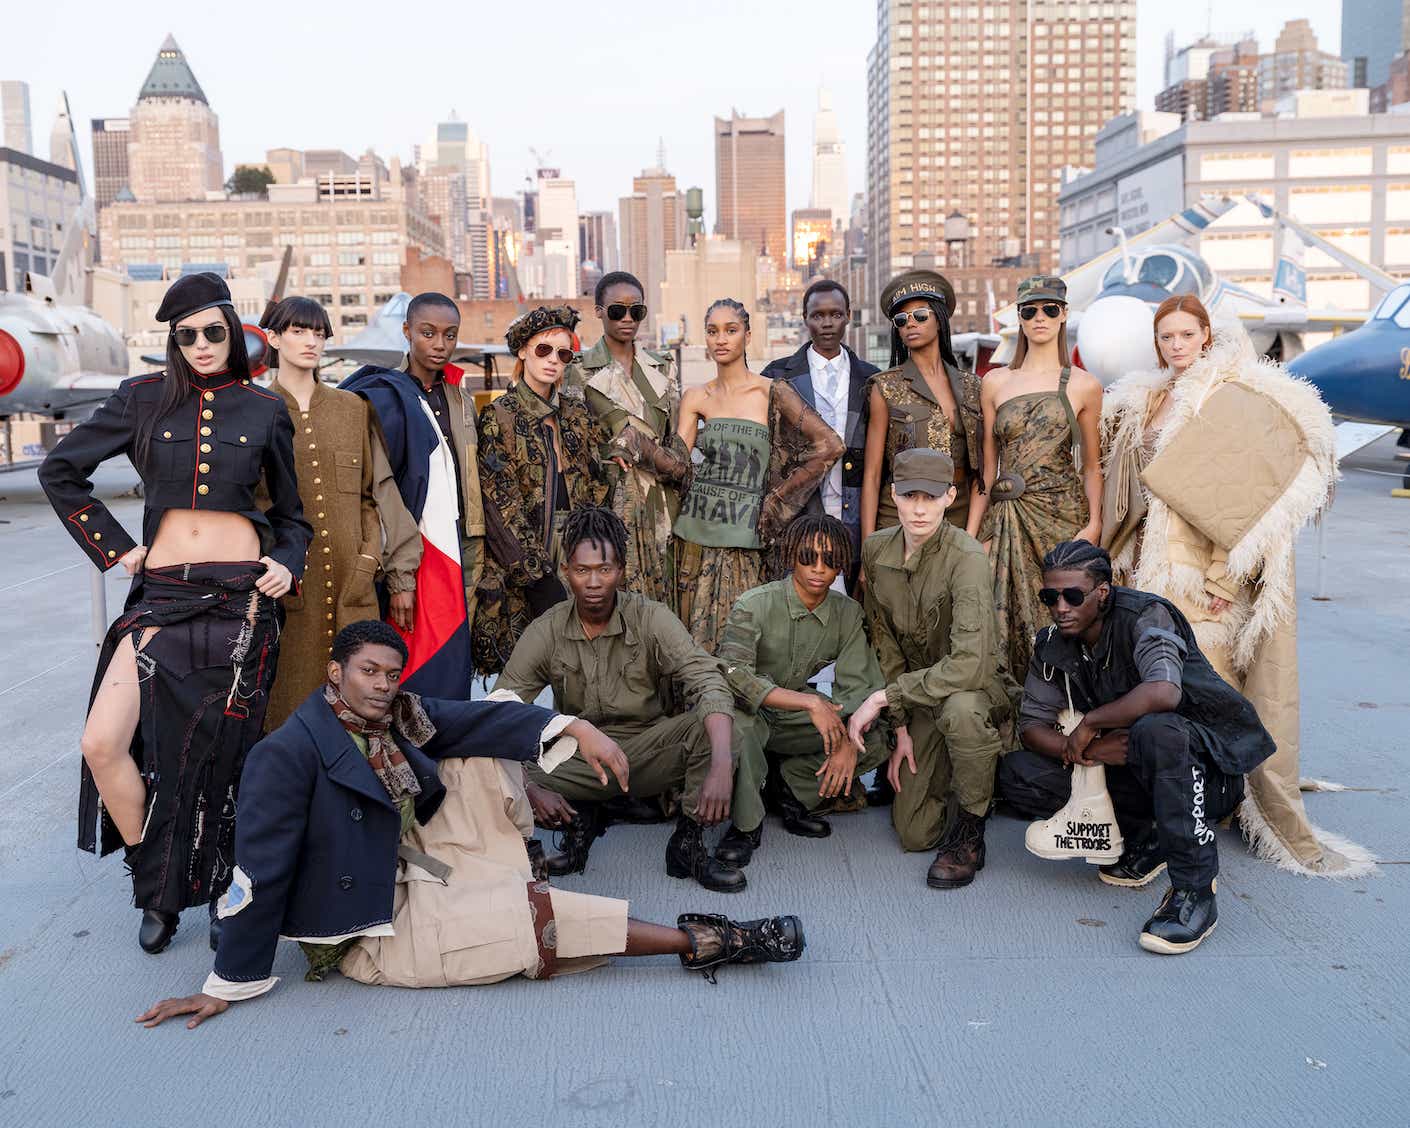 Donna Karan creates couture clothing out of old MILITARY garments to go up  for auction